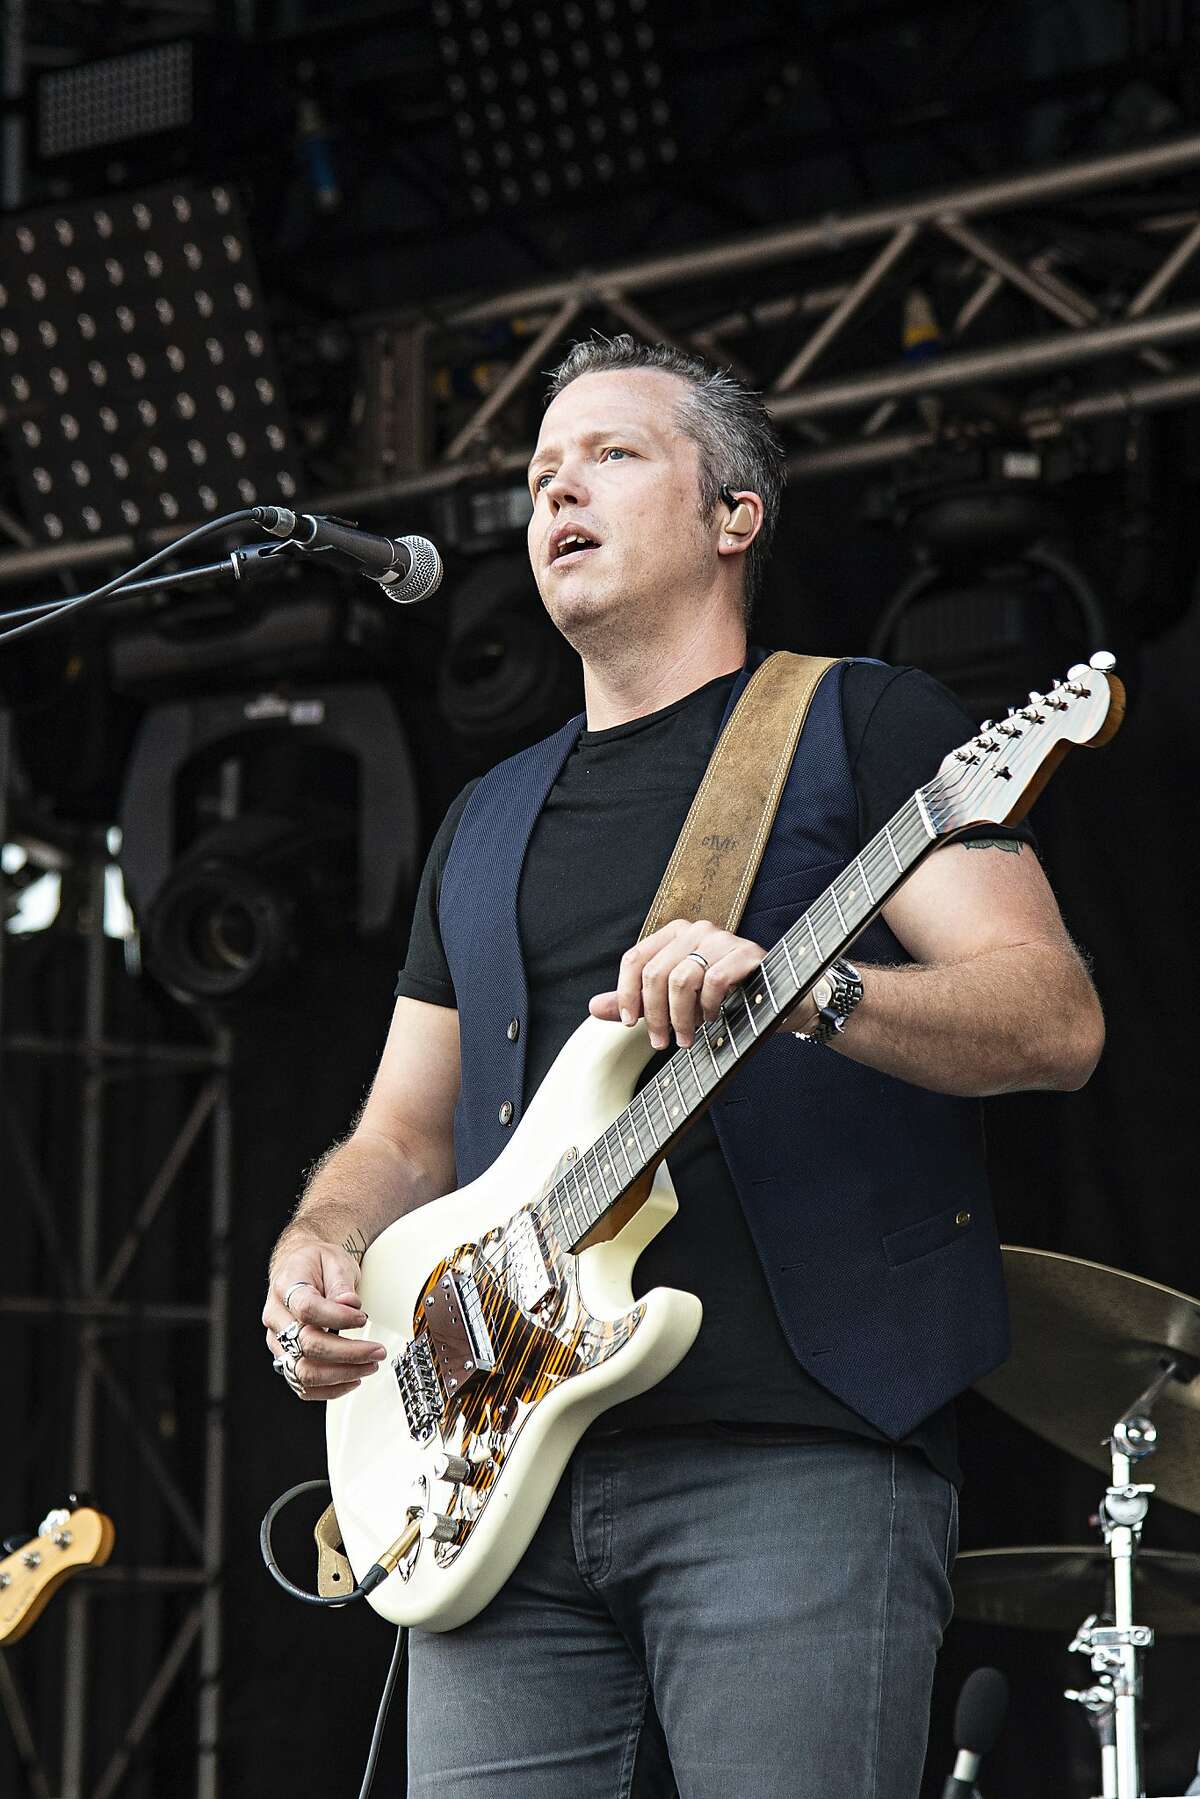 Jason Isbell, of Jason Isbell & The 400 Unit, performs at Forecastle Music Festival at Waterfront Park on Sunday, July 15, 2018, in Louisville, Ky. (Photo by Amy Harris/Invision/AP)